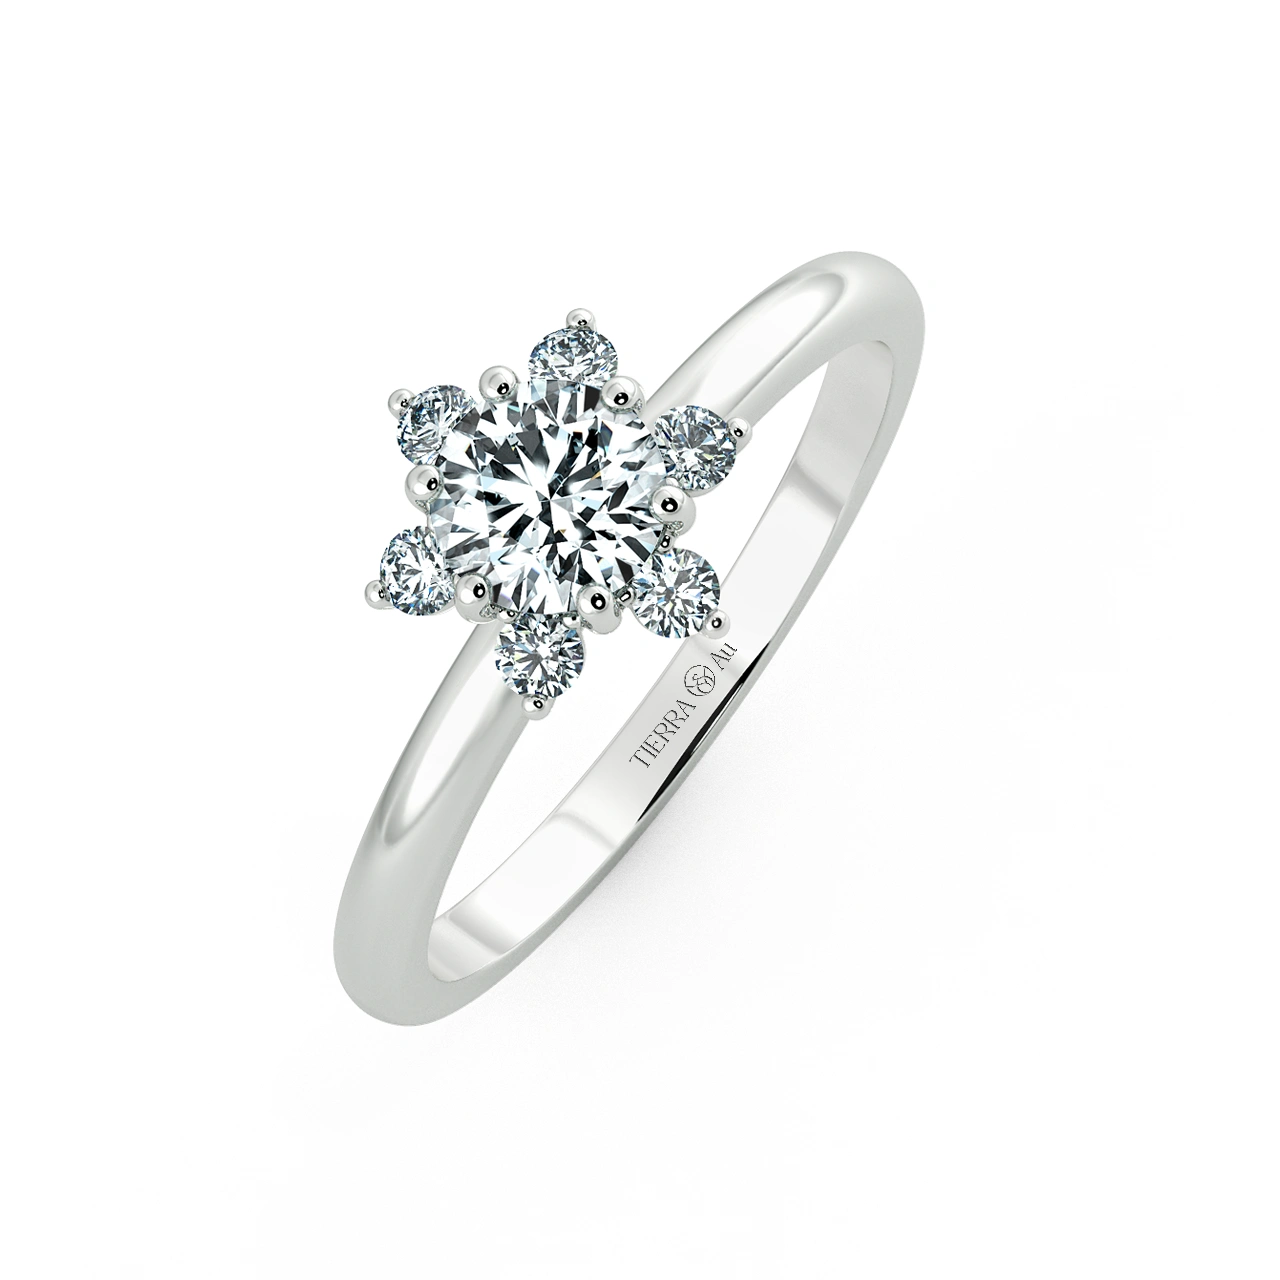 Small Halo Snowflake Engagement Ring, Shiny Band with Bezel Setting NCH2003 3